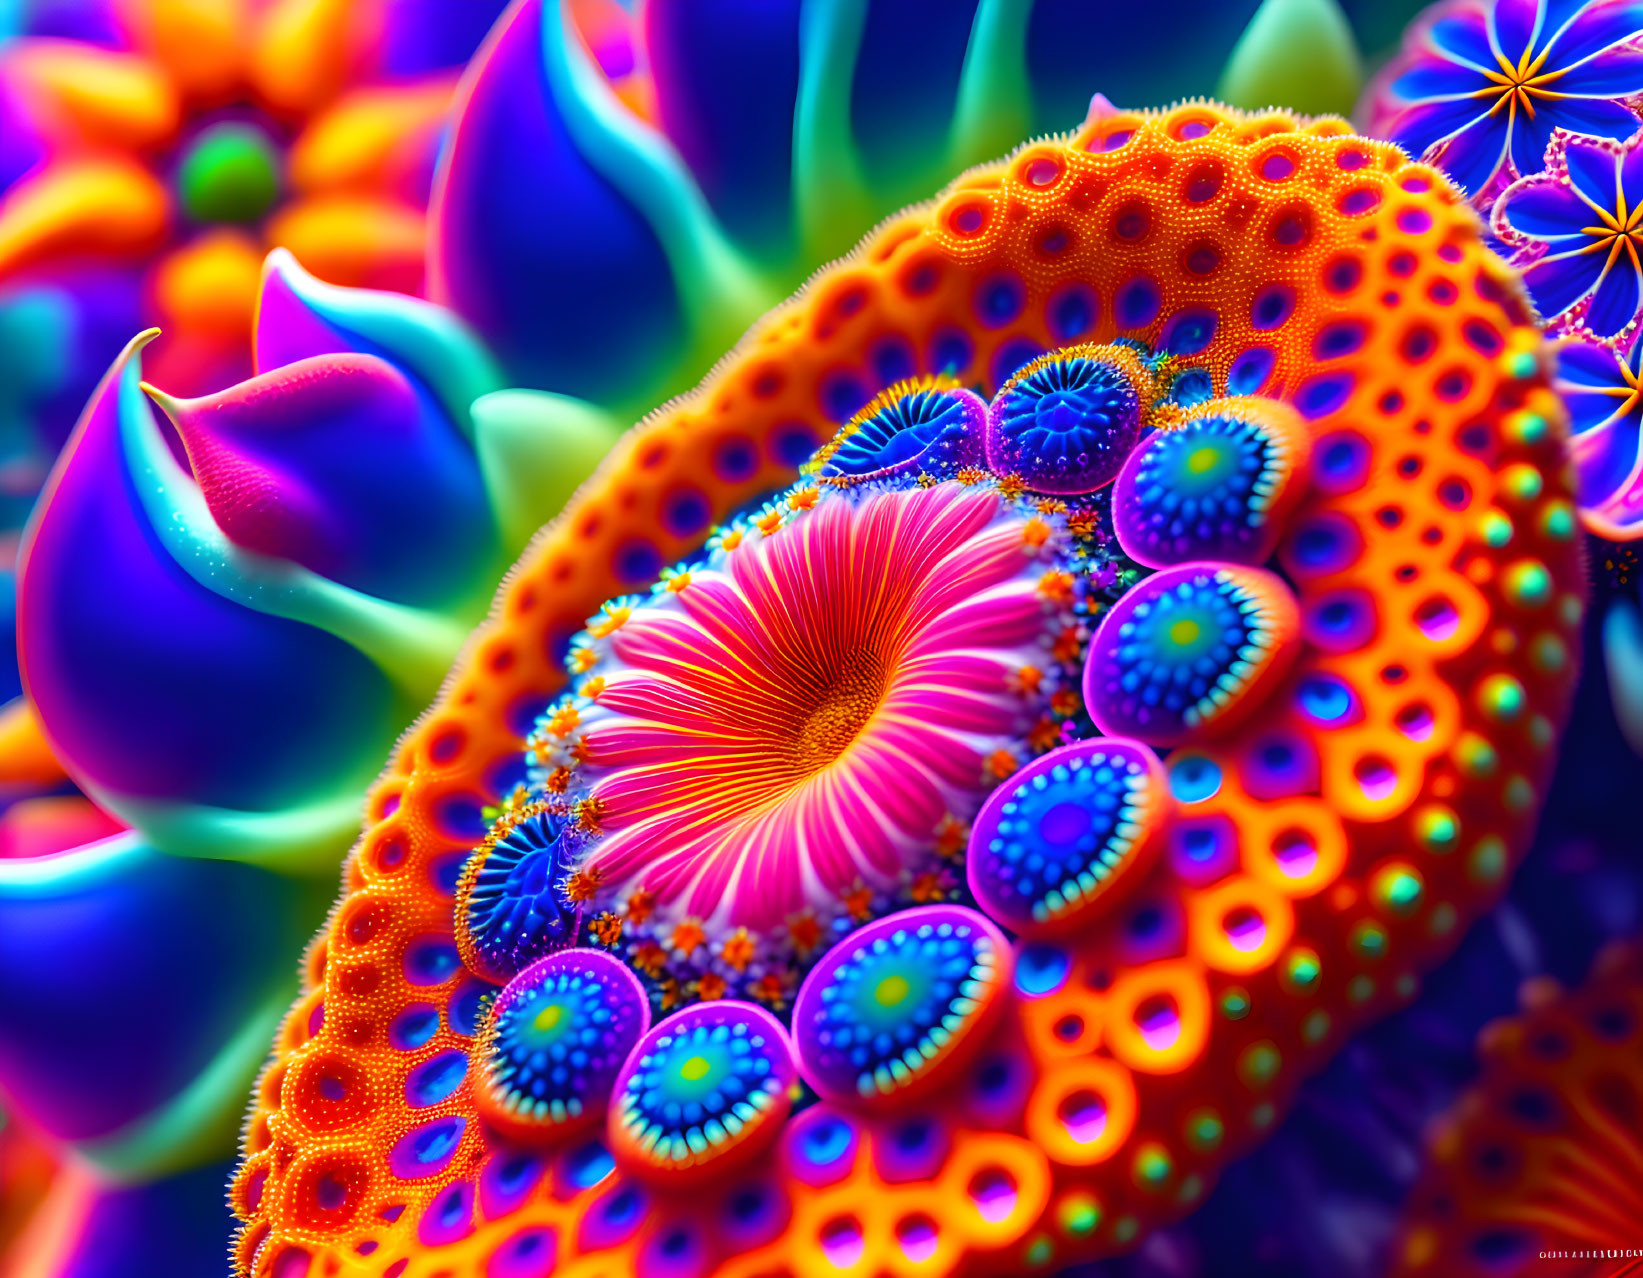 Colorful Psychedelic Digital Art: Vibrant Fractal Patterns of Exotic Marine Life